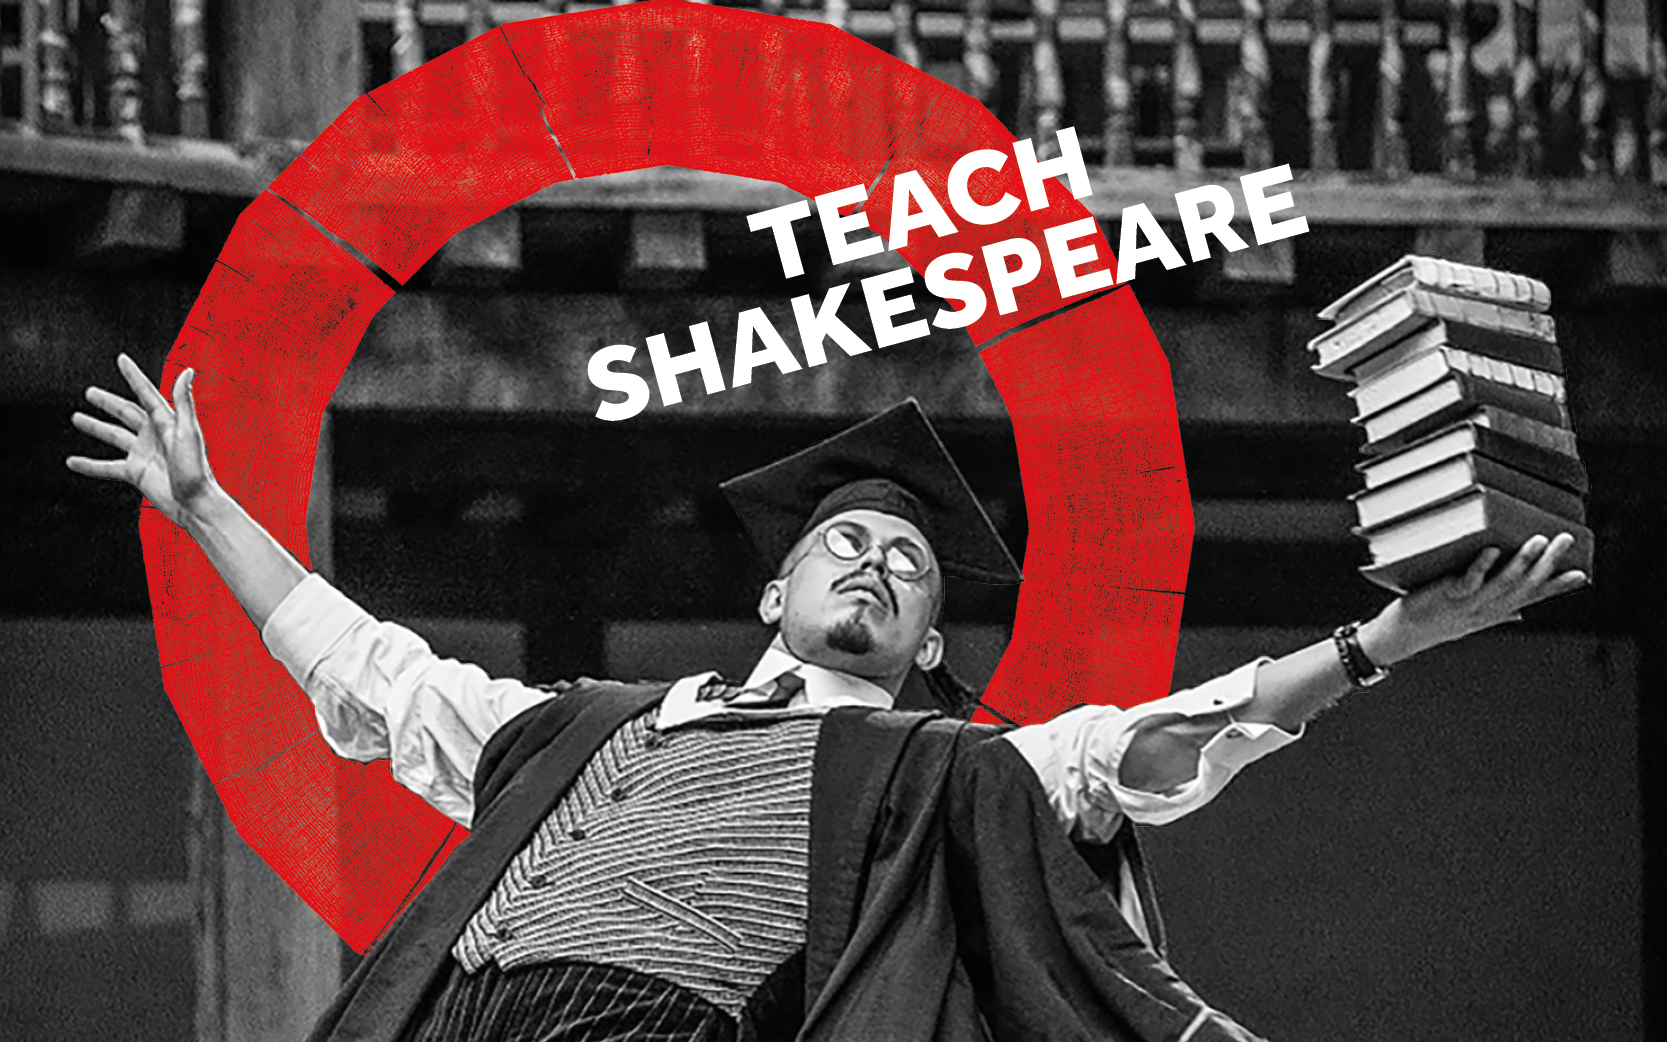 [IMAGE] An actor wearing a mortar board precariously balances a stack of books in one hand. The words ' Teach Shakespeare' appear above him.